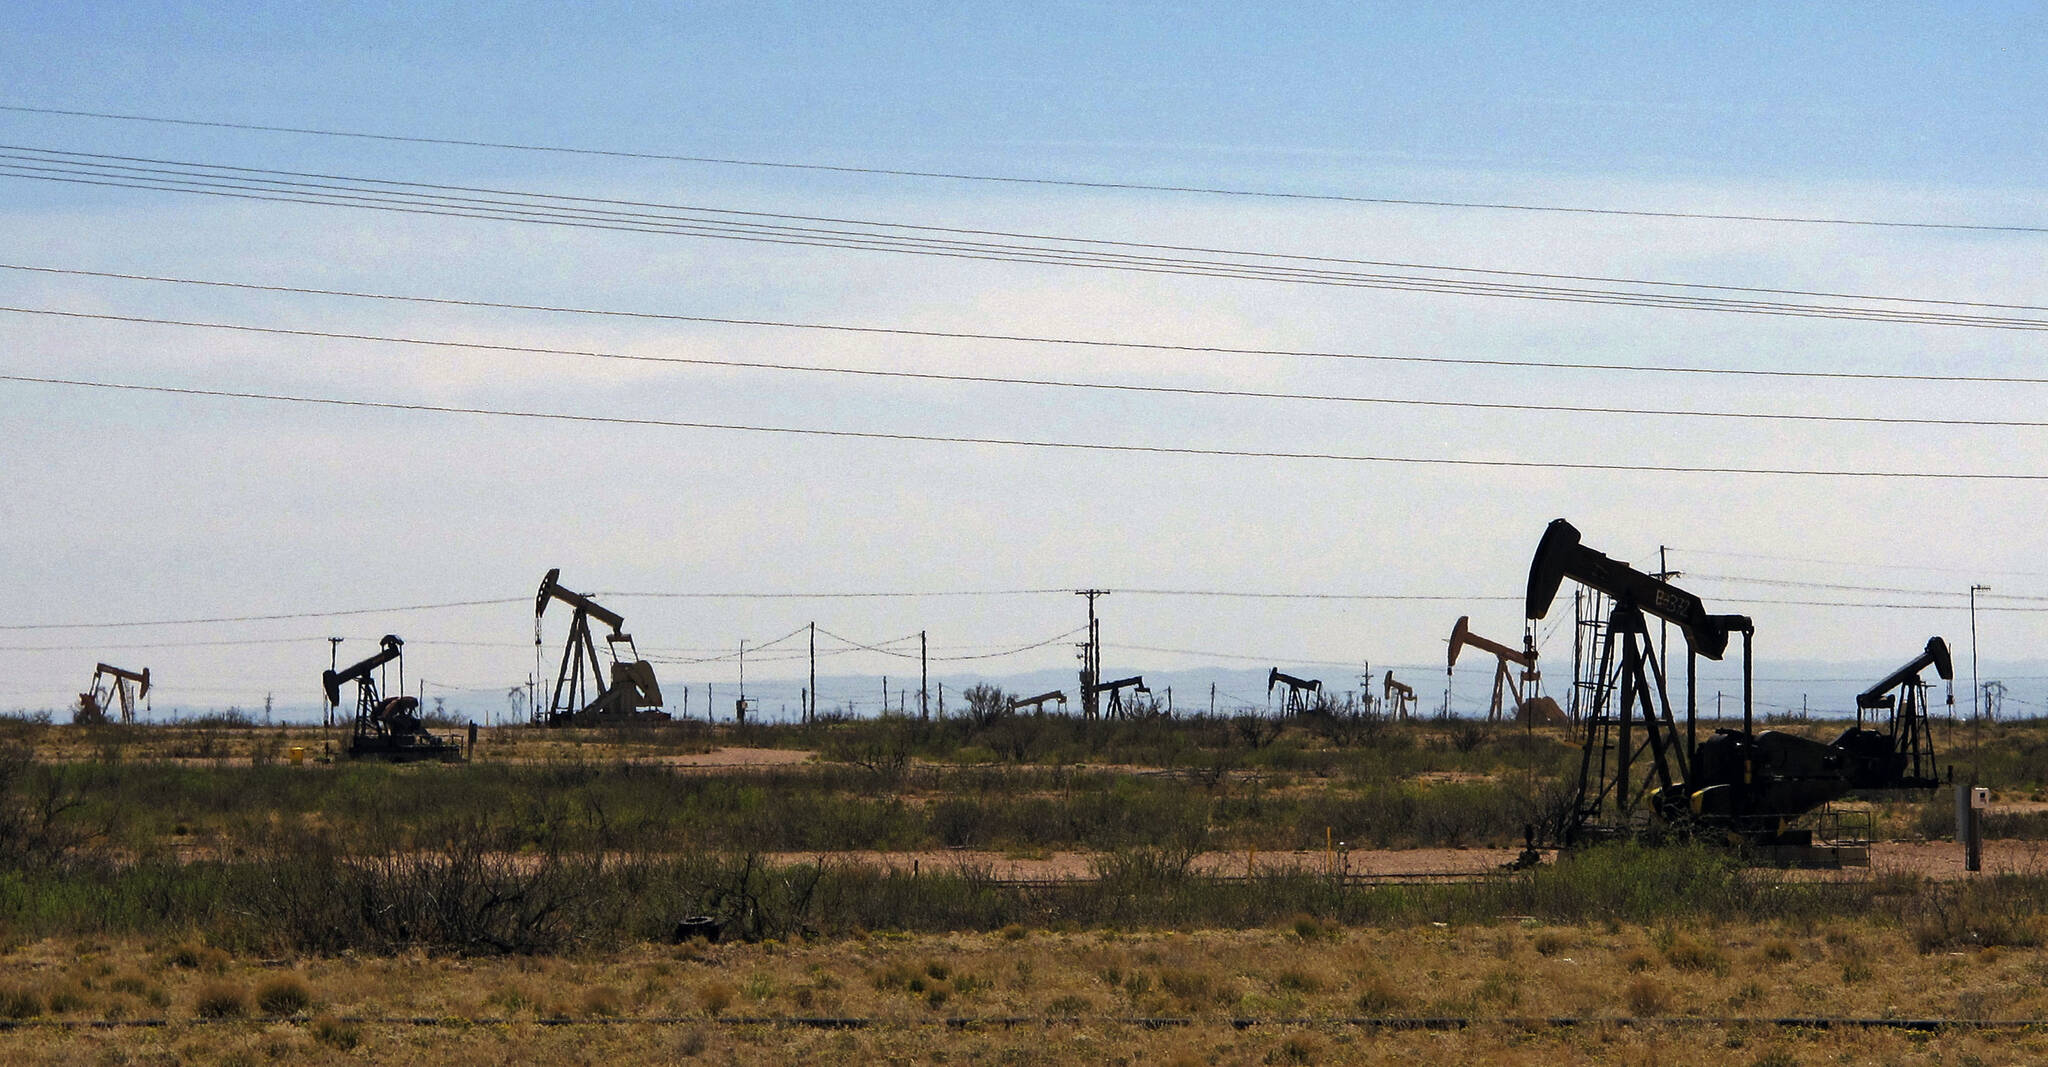 Oil rigs stand in the Loco Hills field along U.S. Highway 82 in Eddy County, near Artesia, N.M., one of the most active regions of the Permian Basin. Government budgets are booming in New Mexico. The reason behind the spending spree — oil. New Mexico is the No. 2 crude oil producer among U.S. states and the top recipient of U.S. disbursements for fossil fuel production on federal land. But a budget flush with petroleum cash has a side effect: It also puts the spotlight on how difficult it is for New Mexico and other states to turn their rhetoric on tackling climate change into reality. (AP Photo / Jeri Clausing)